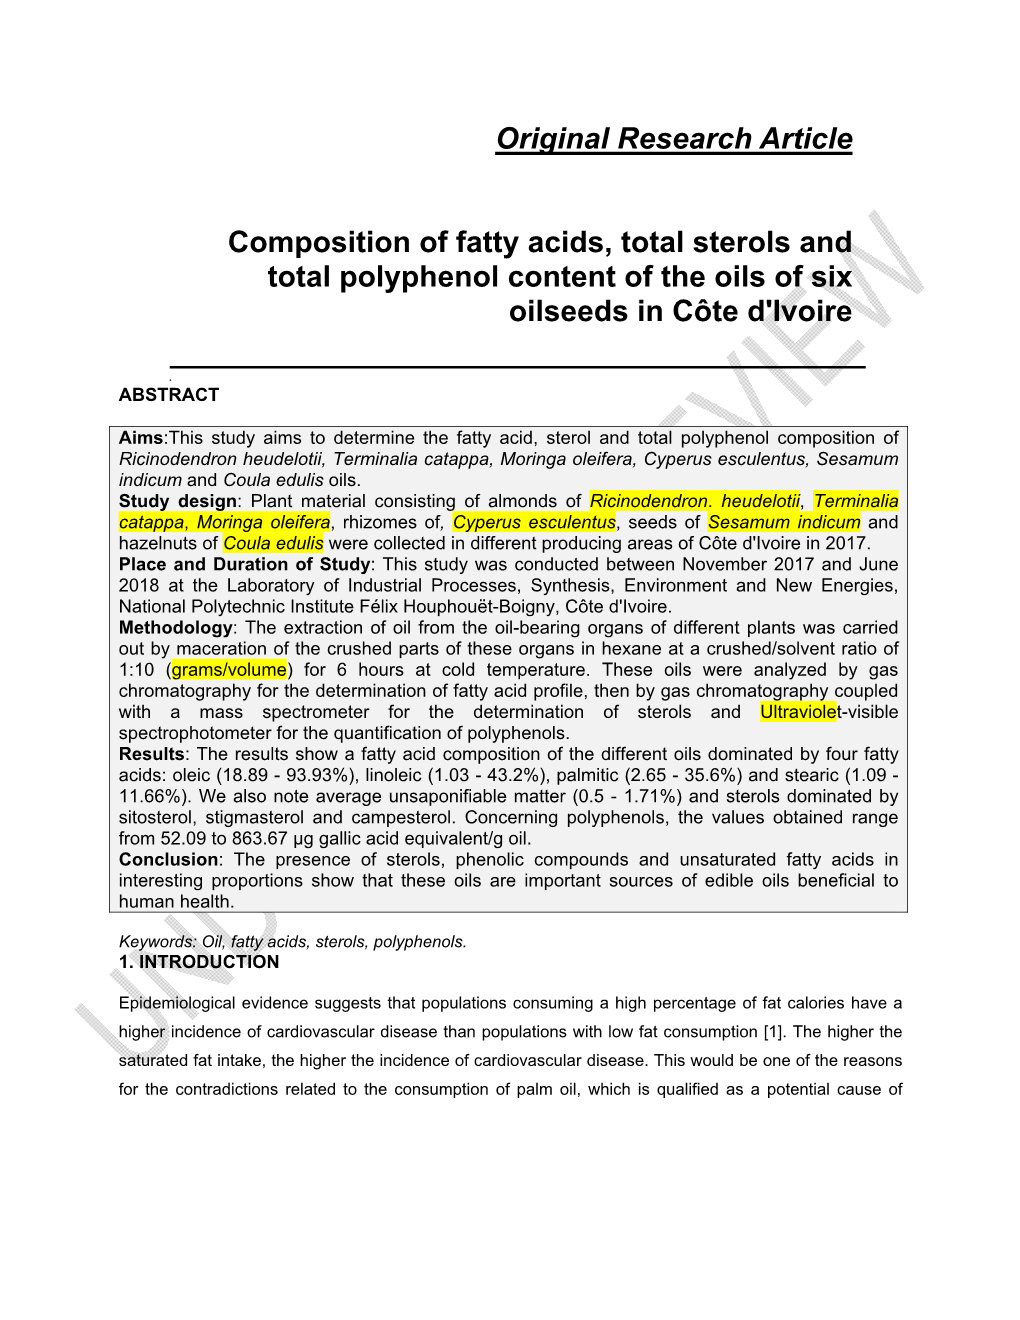 Original Research Article Composition of Fatty Acids, Total Sterols and Total